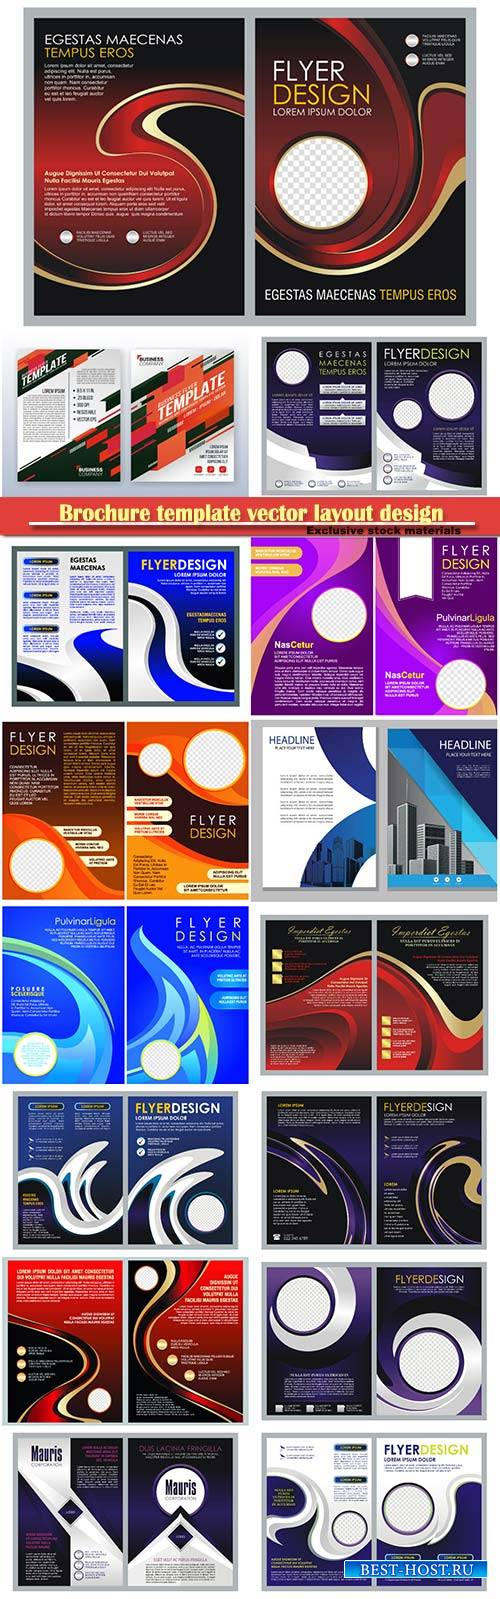 Brochure template vector layout design, corporate business annual report, magazine, flyer mockup # 247